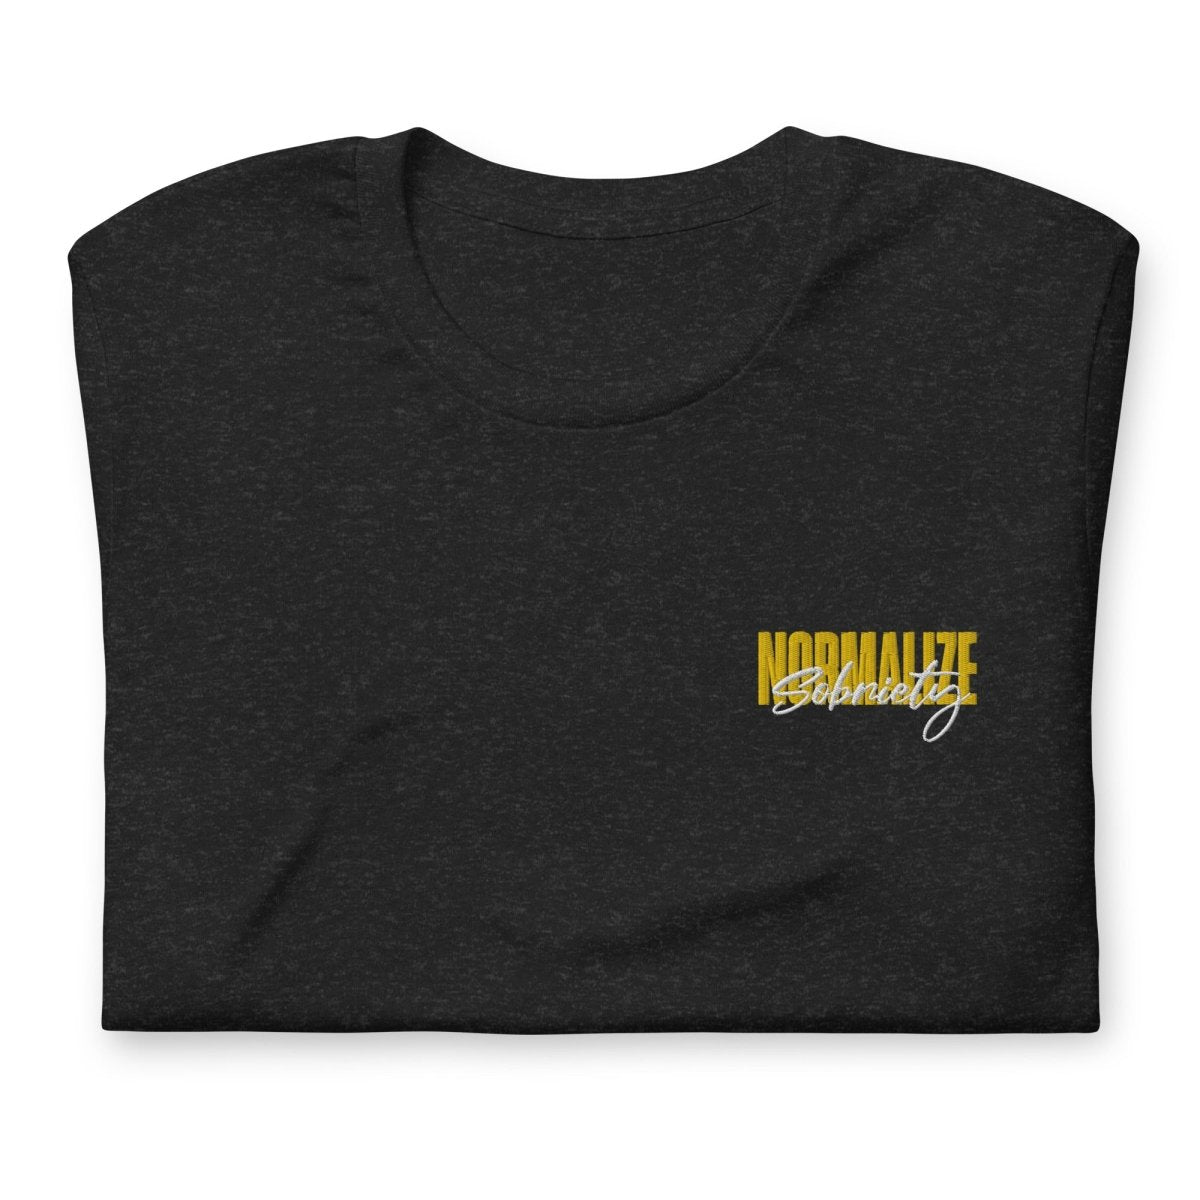 "Normalize Sobriety" Embroidered T-Shirt - Black Heather / S | Sobervation